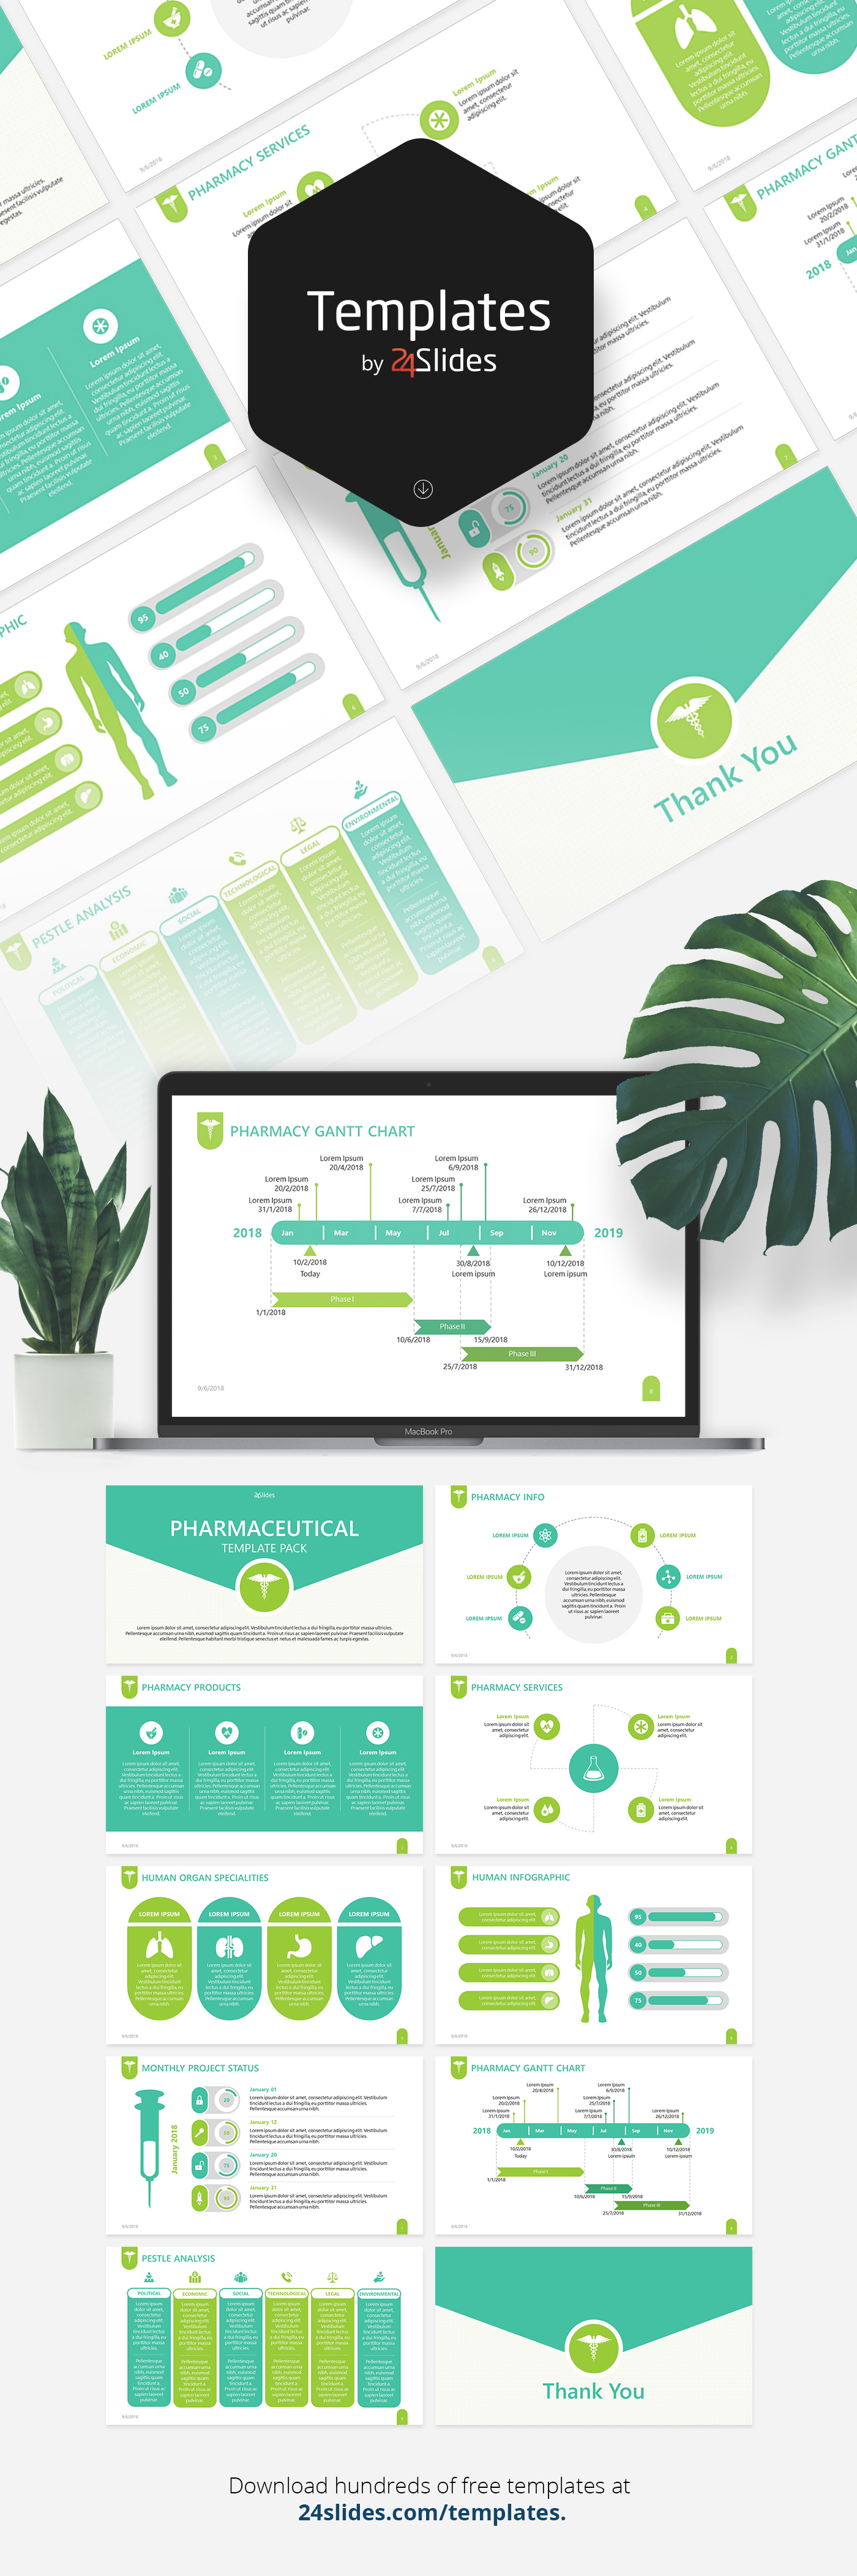 Powerpoint Template Free Download 2015 from cdn.dribbble.com